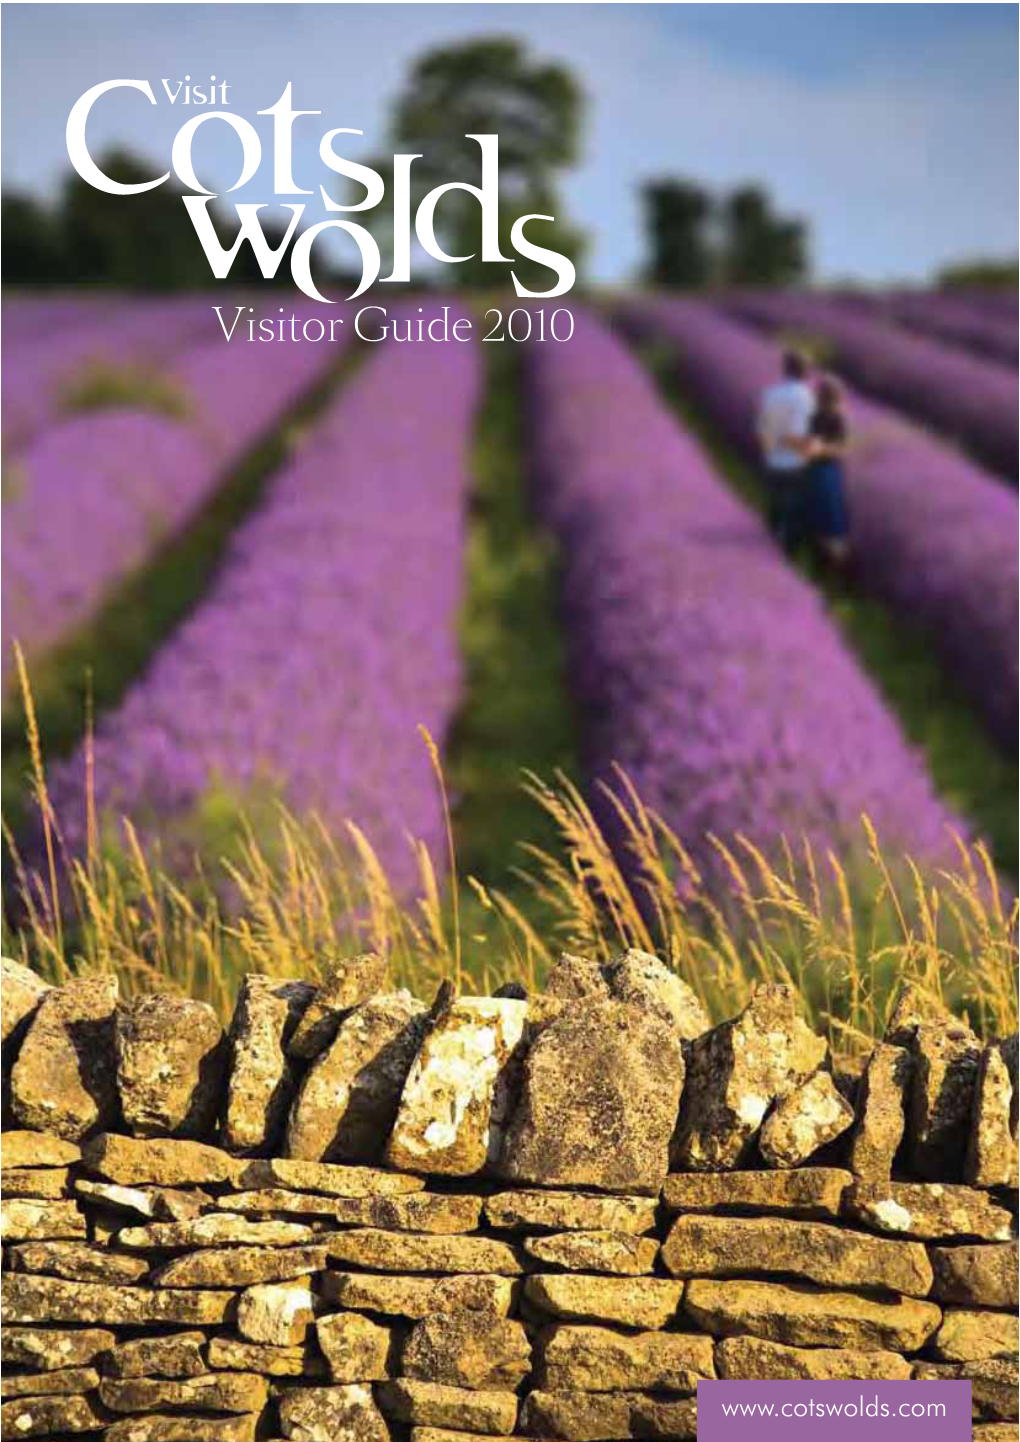 Cotswolds.Com Visit the Cotswolds Contents Hundreds of Miles, Hundreds of Places to Stay and PAGES 4-5 Hundreds of Things to See and Do